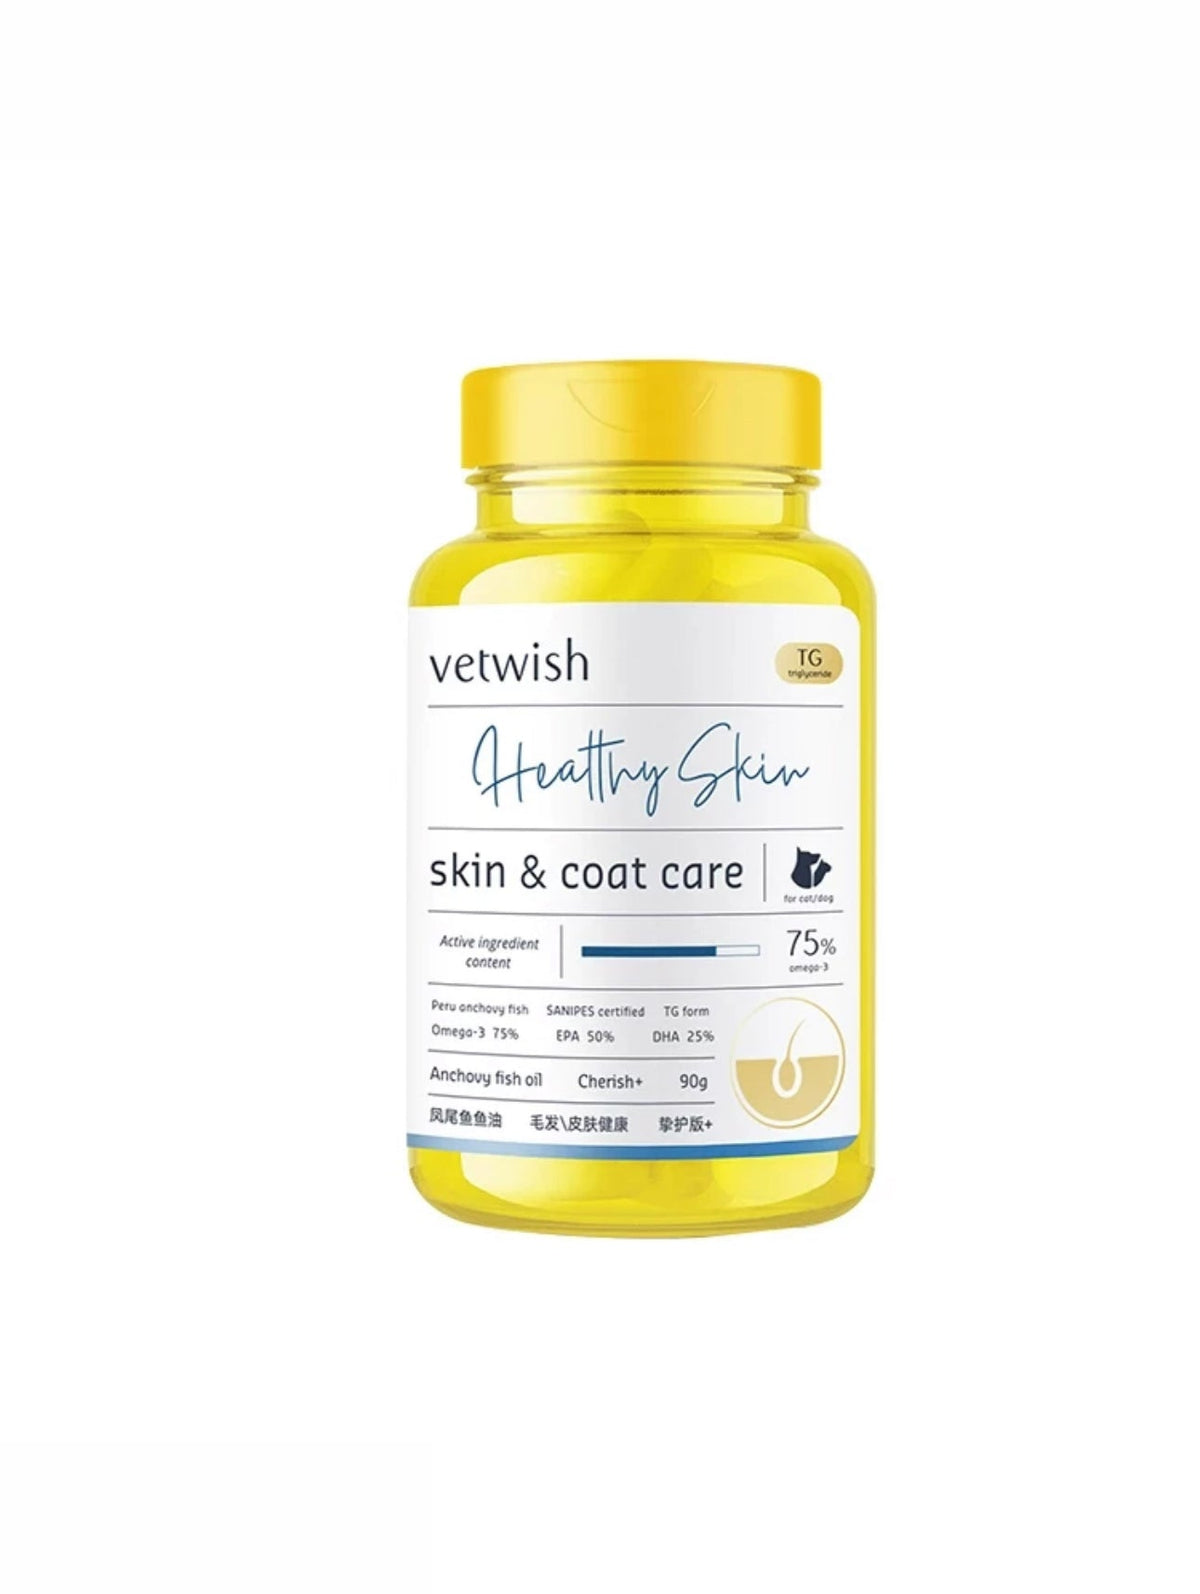 Vetwish Anchovy Fish Oil - petspacestores